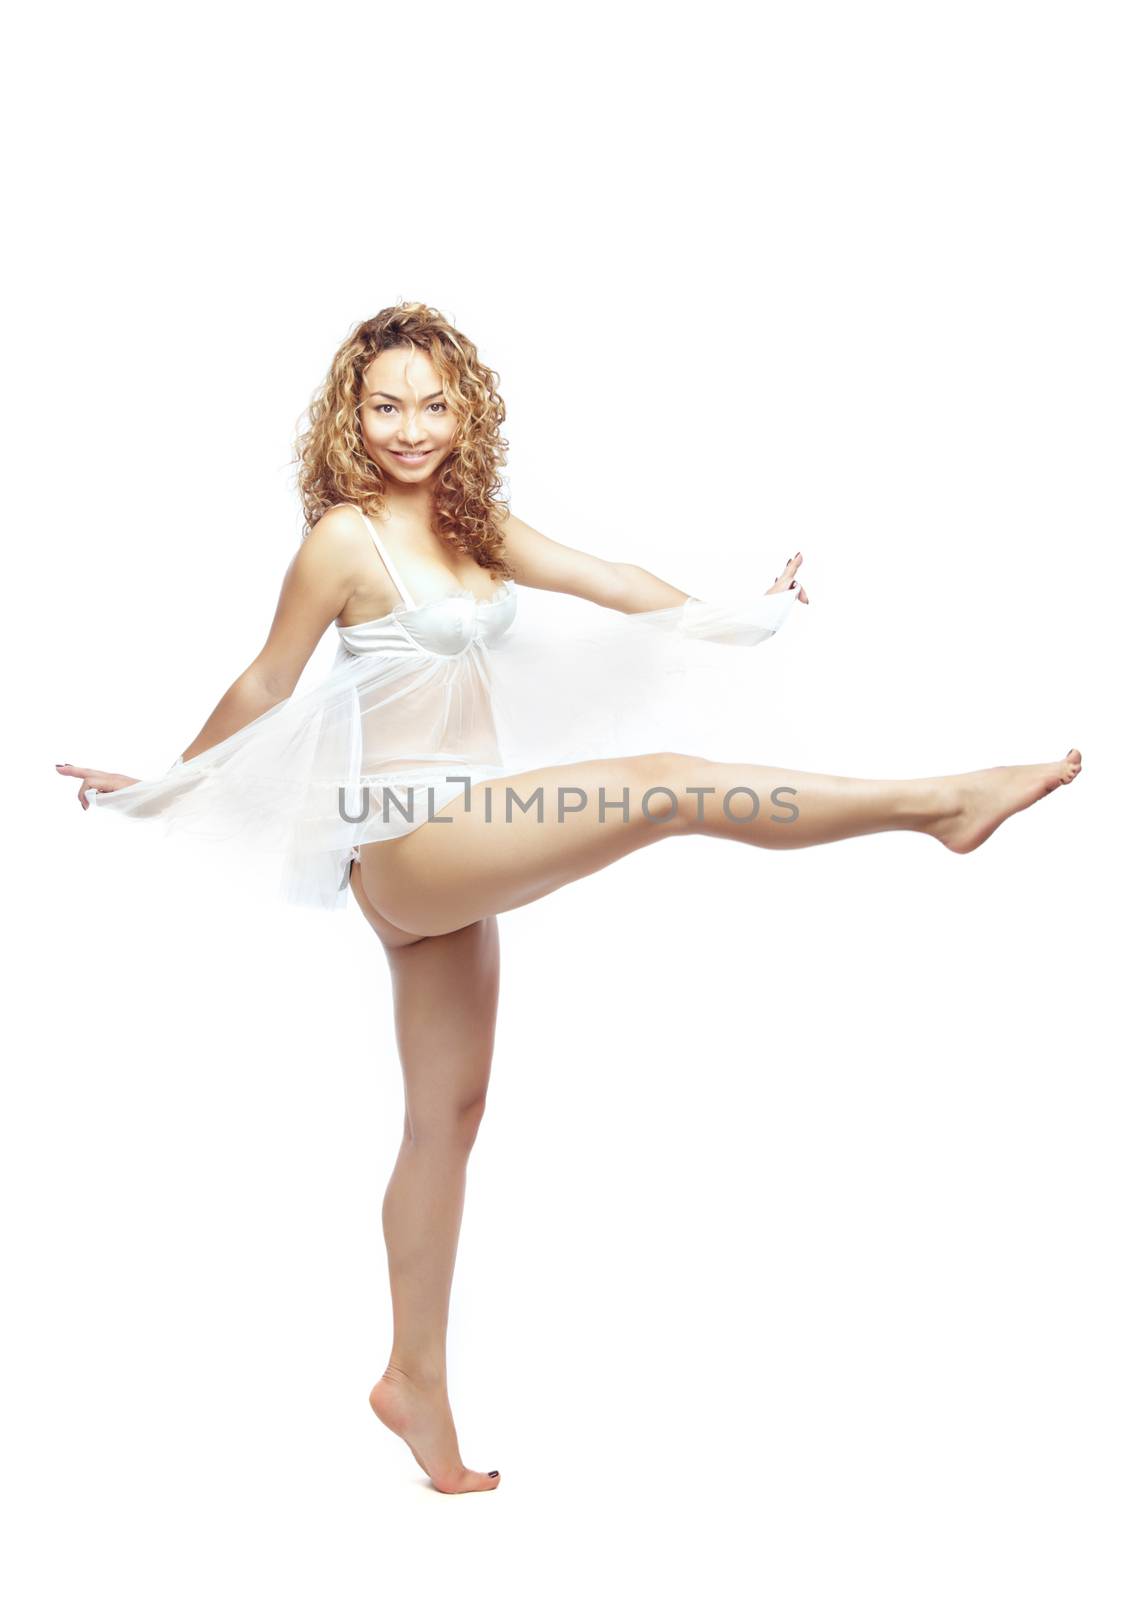 Latin woman with curly hairs swinging her leg and dancing in white peignoir